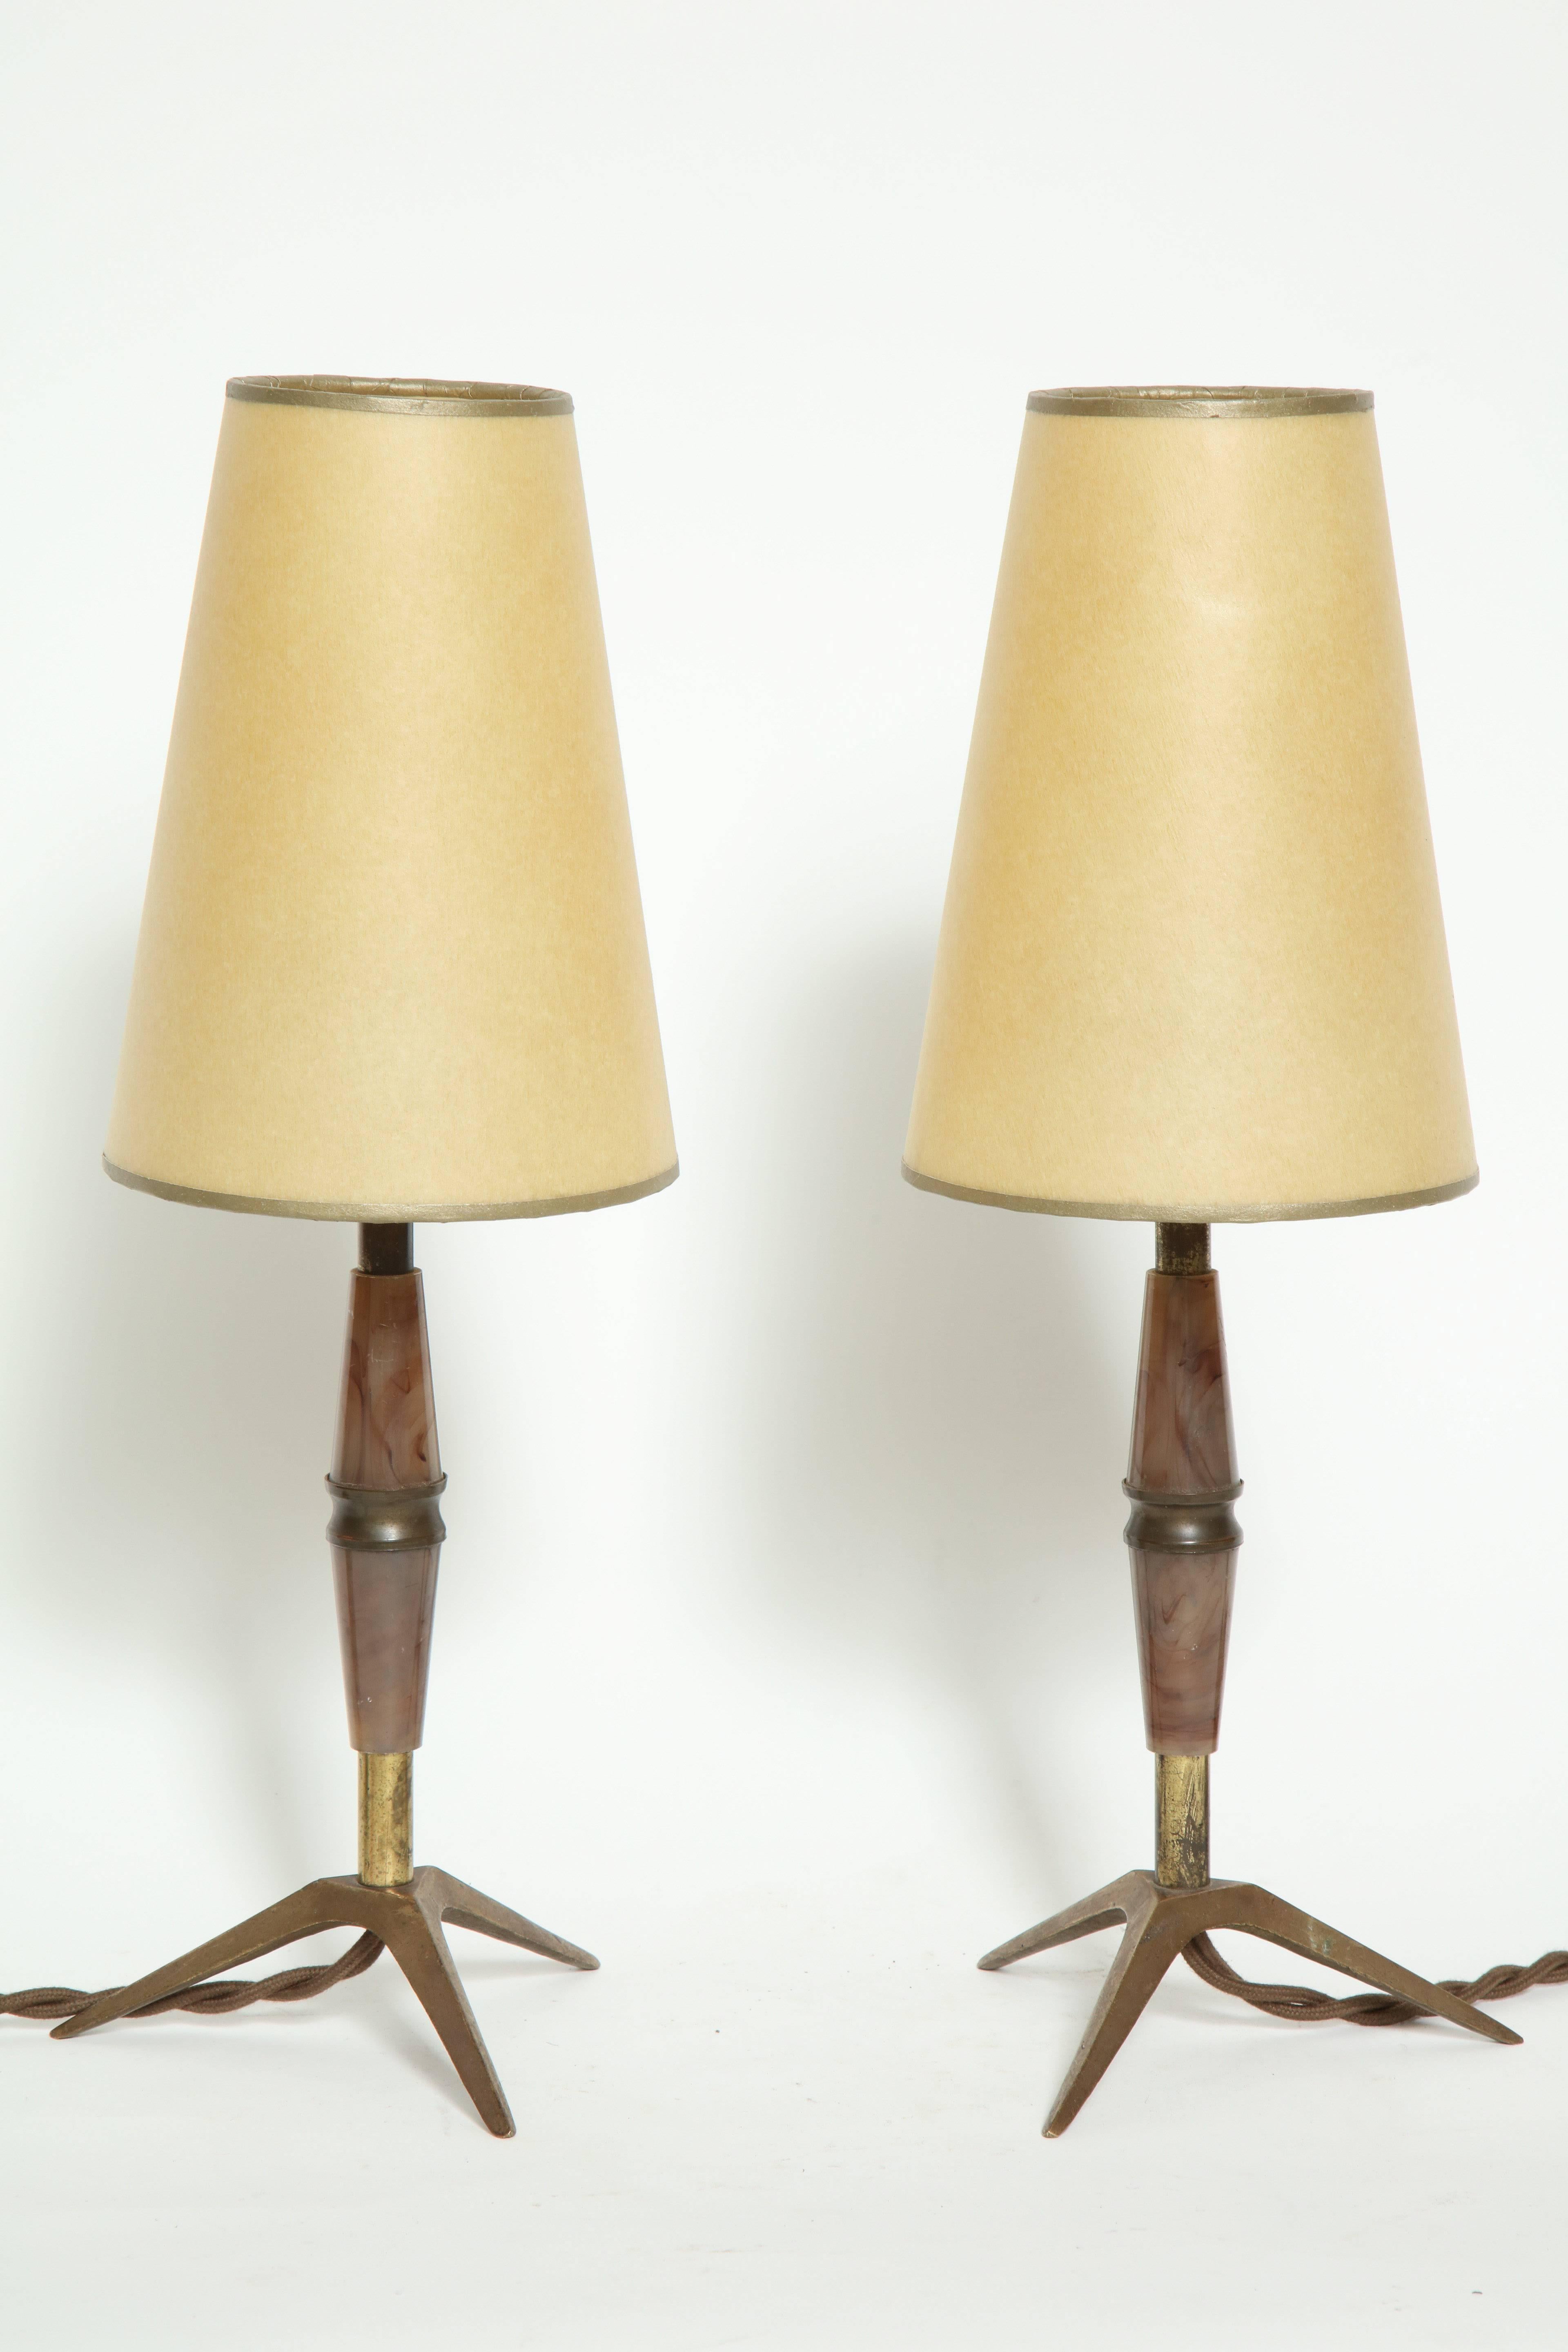 Elegant pair of brass and bakelite table lamps, ideal for a bedside or an accent lamp.